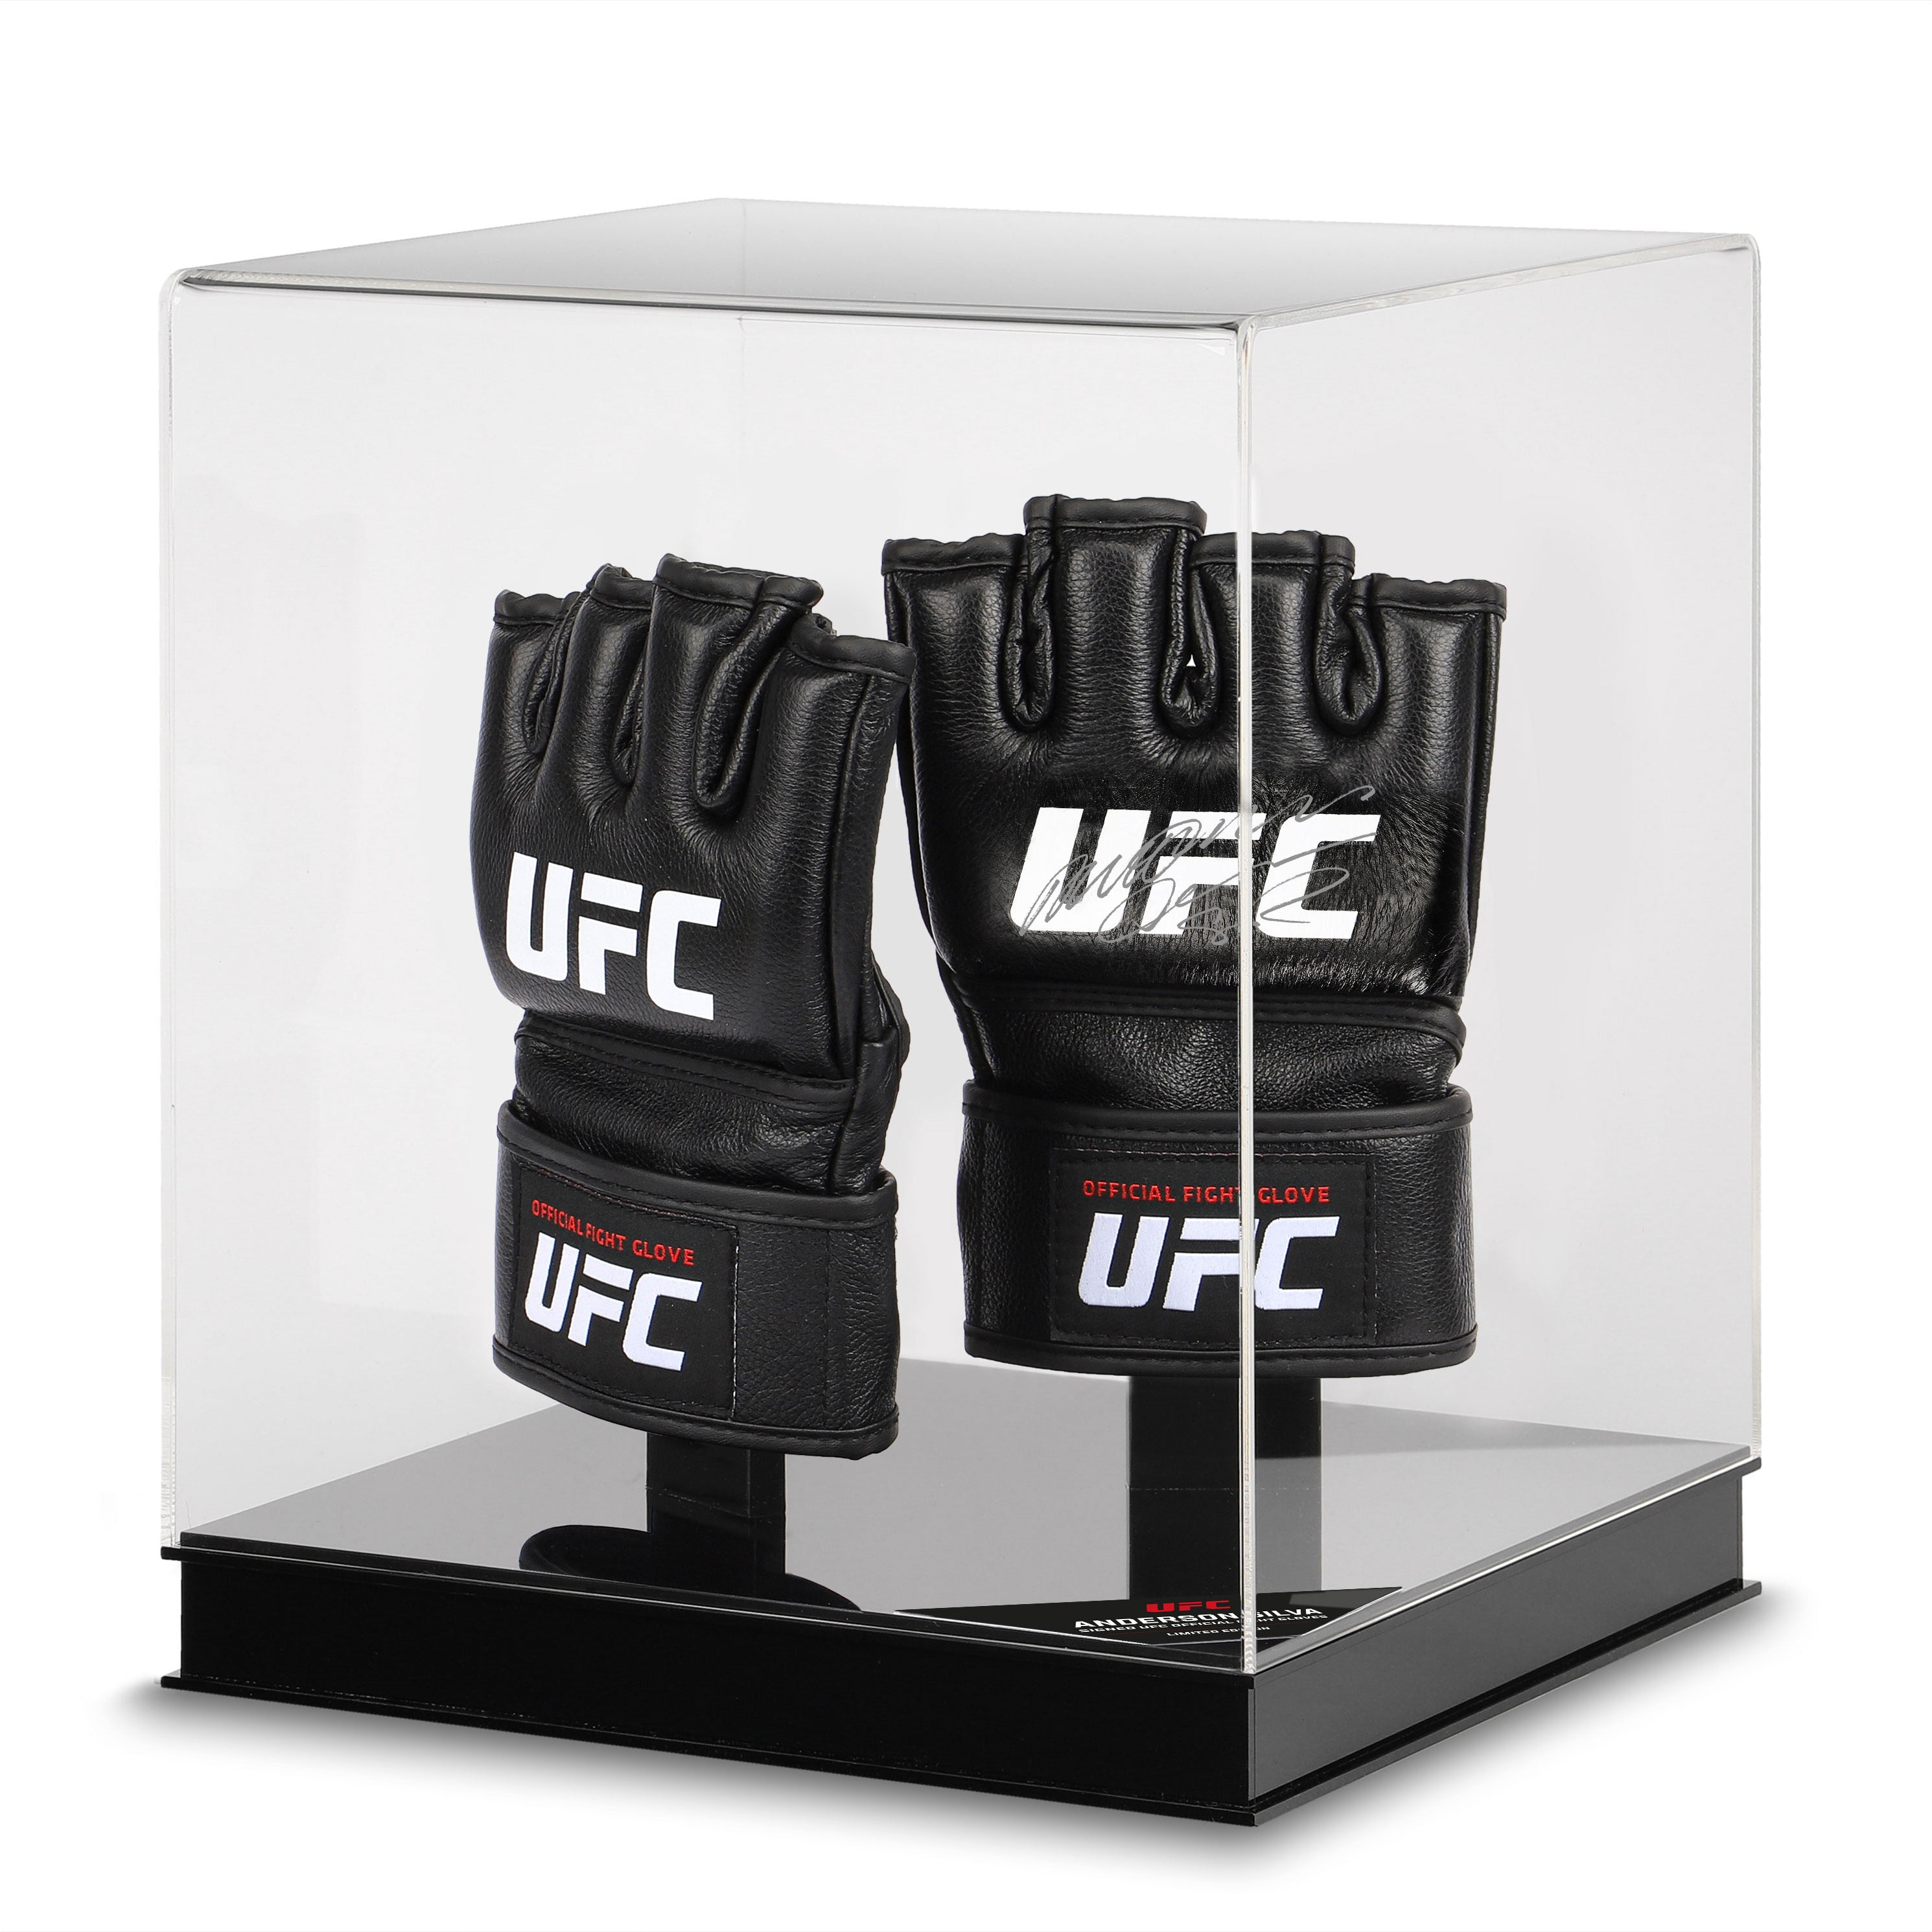 Anderson Silva Signed Official UFC Replica Gloves